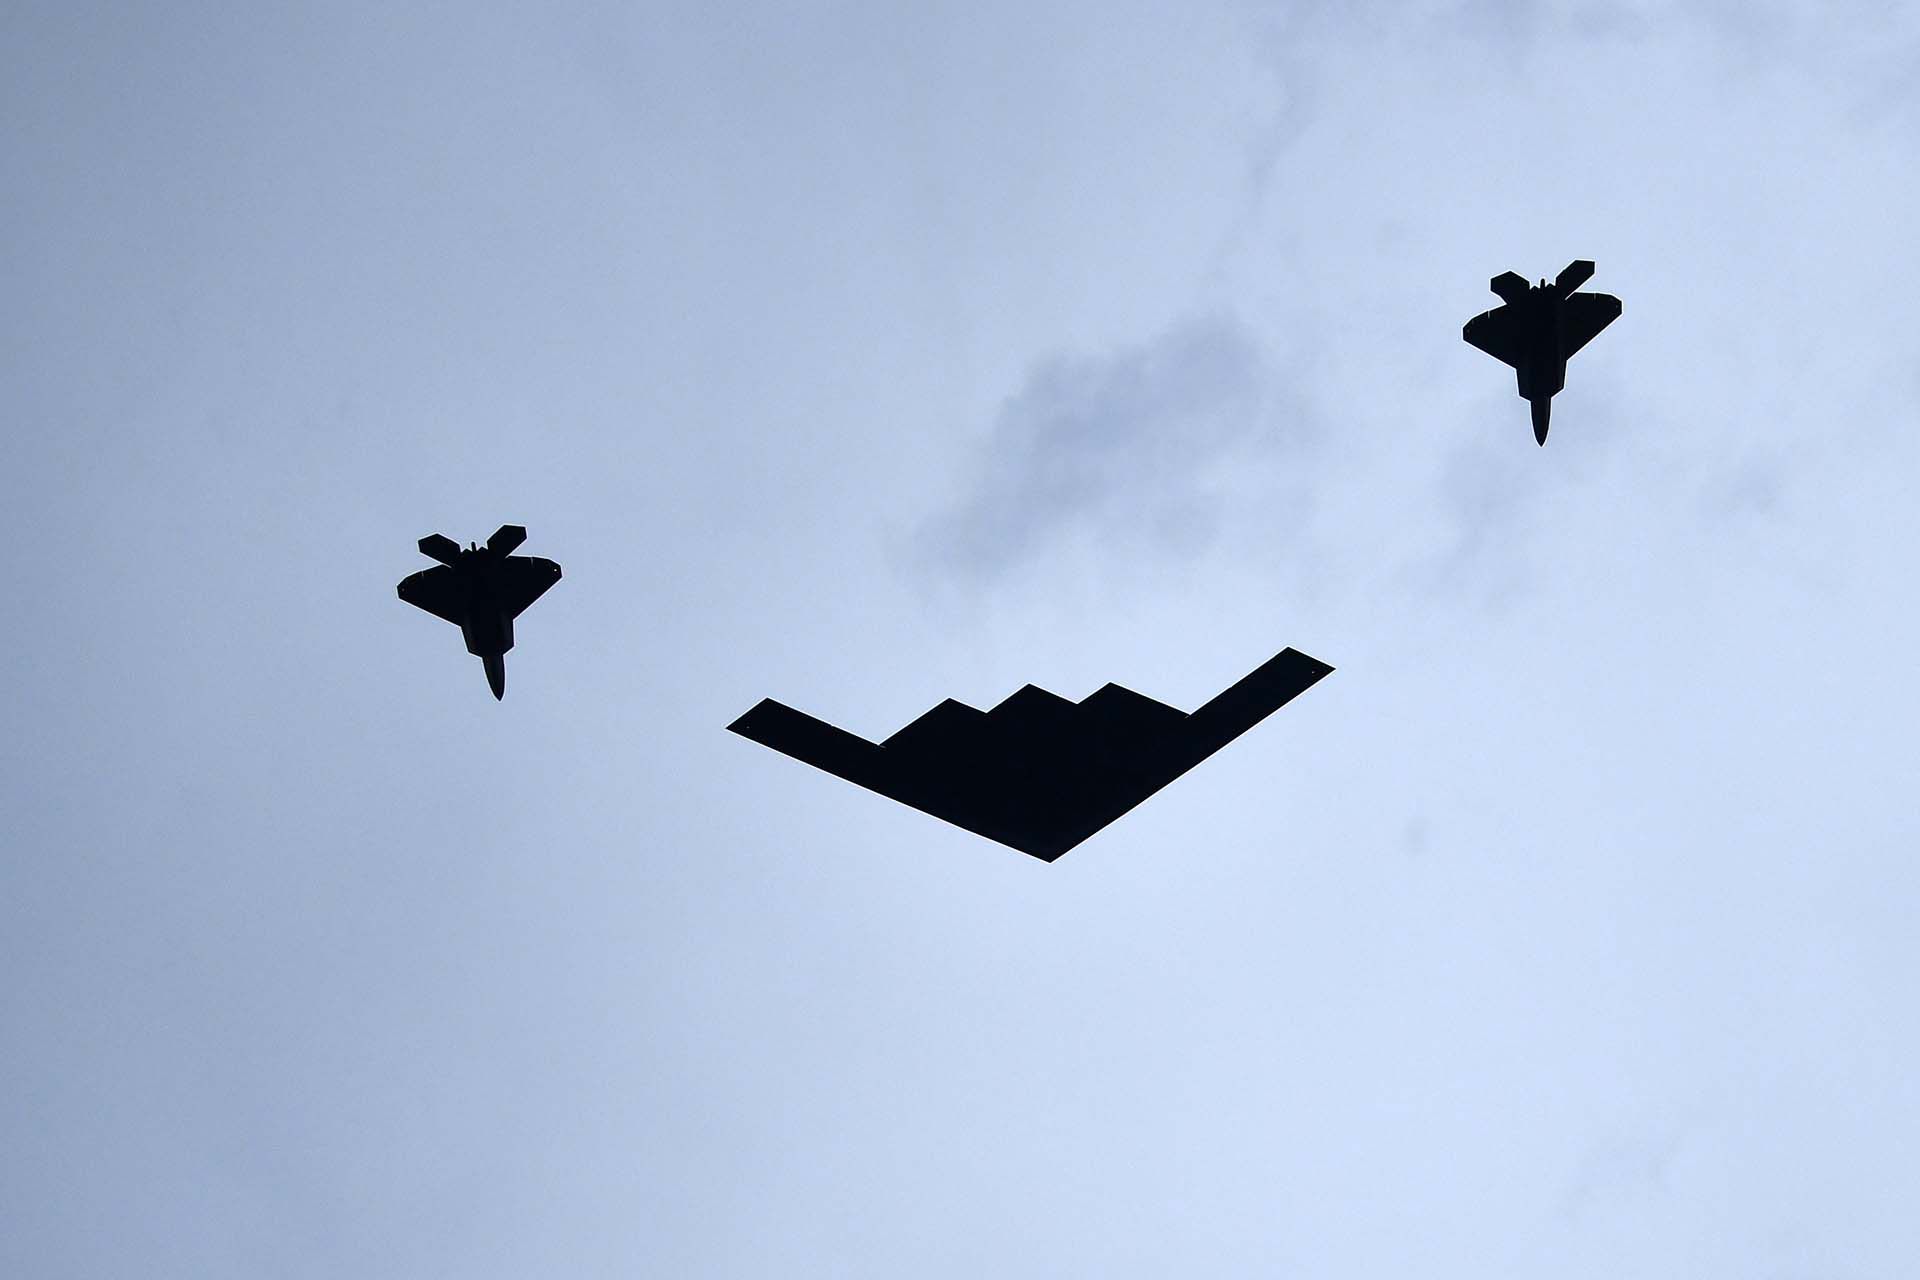 A B-2 Spirit plane (C) escorted by two F-22 Raptors fly past Lincoln Memorial during the “Salute to America” Fourth of July event in Washington, DC, July 4, 2019. (Photo by Brendan Smialowski / AFP)